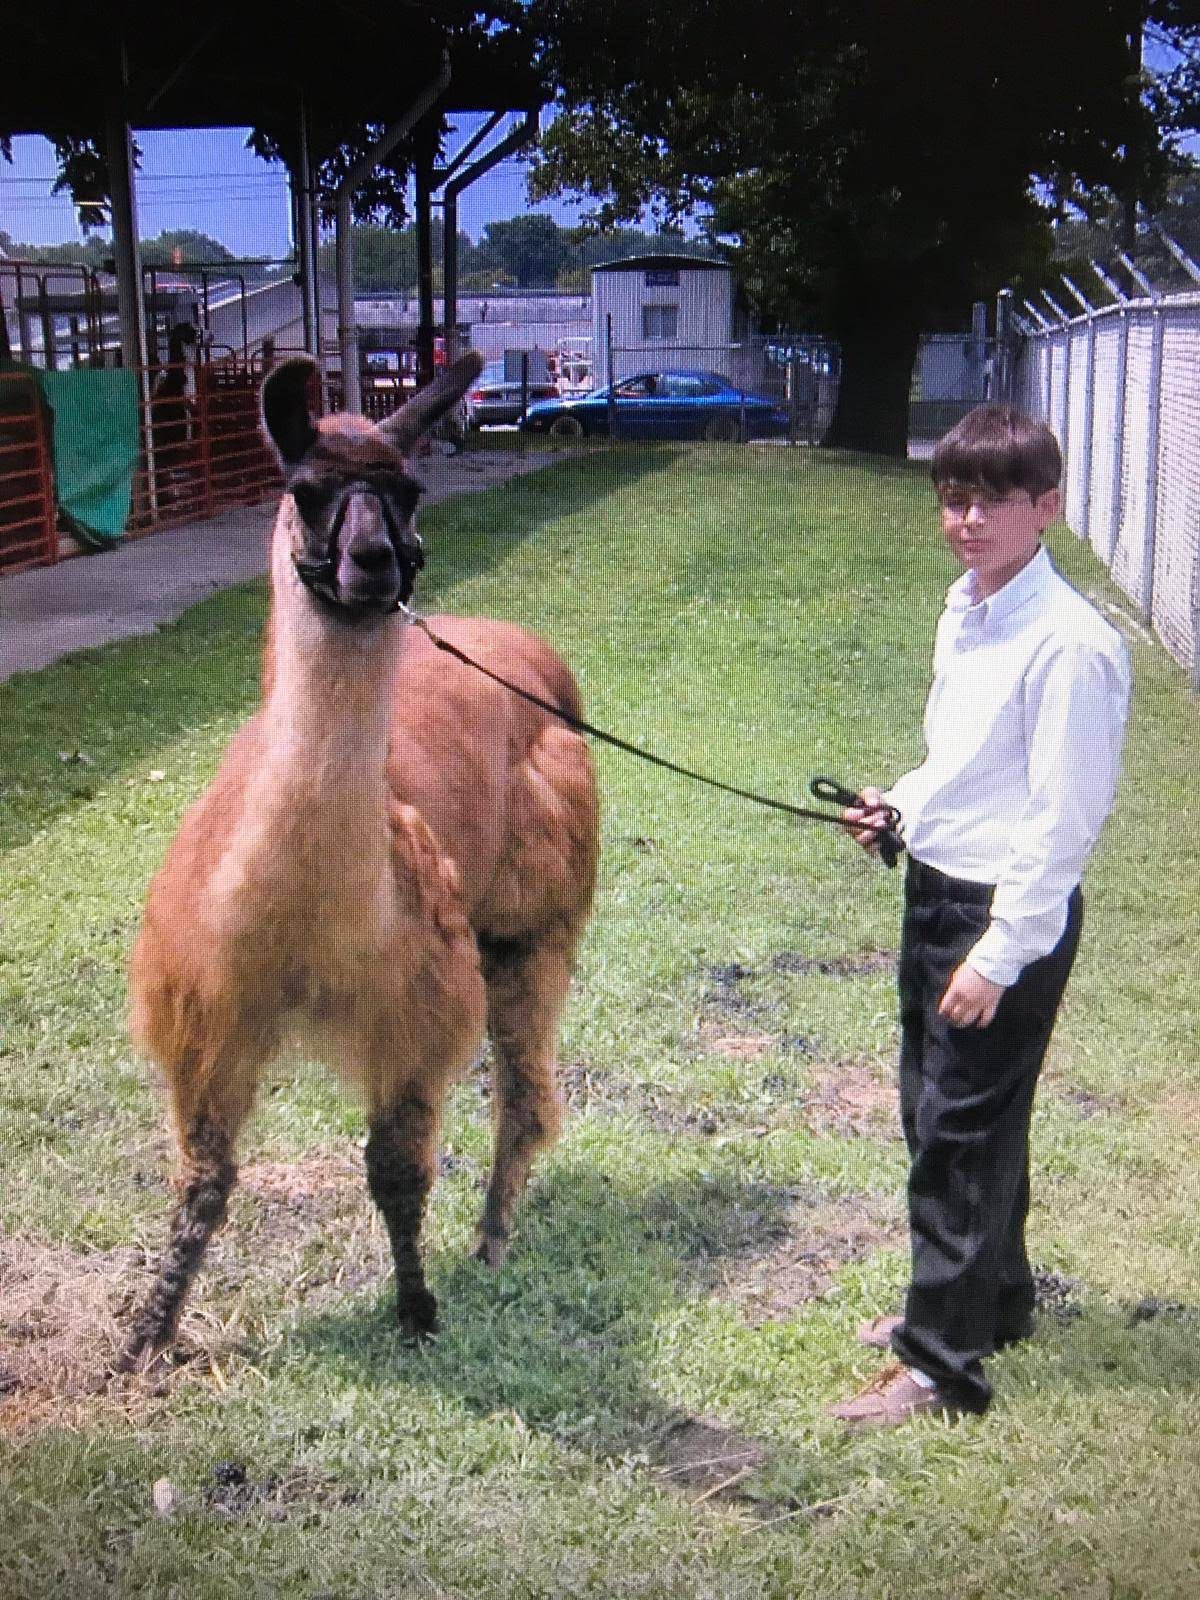 Simon as a child with Hamilton, who he raised for 4-H